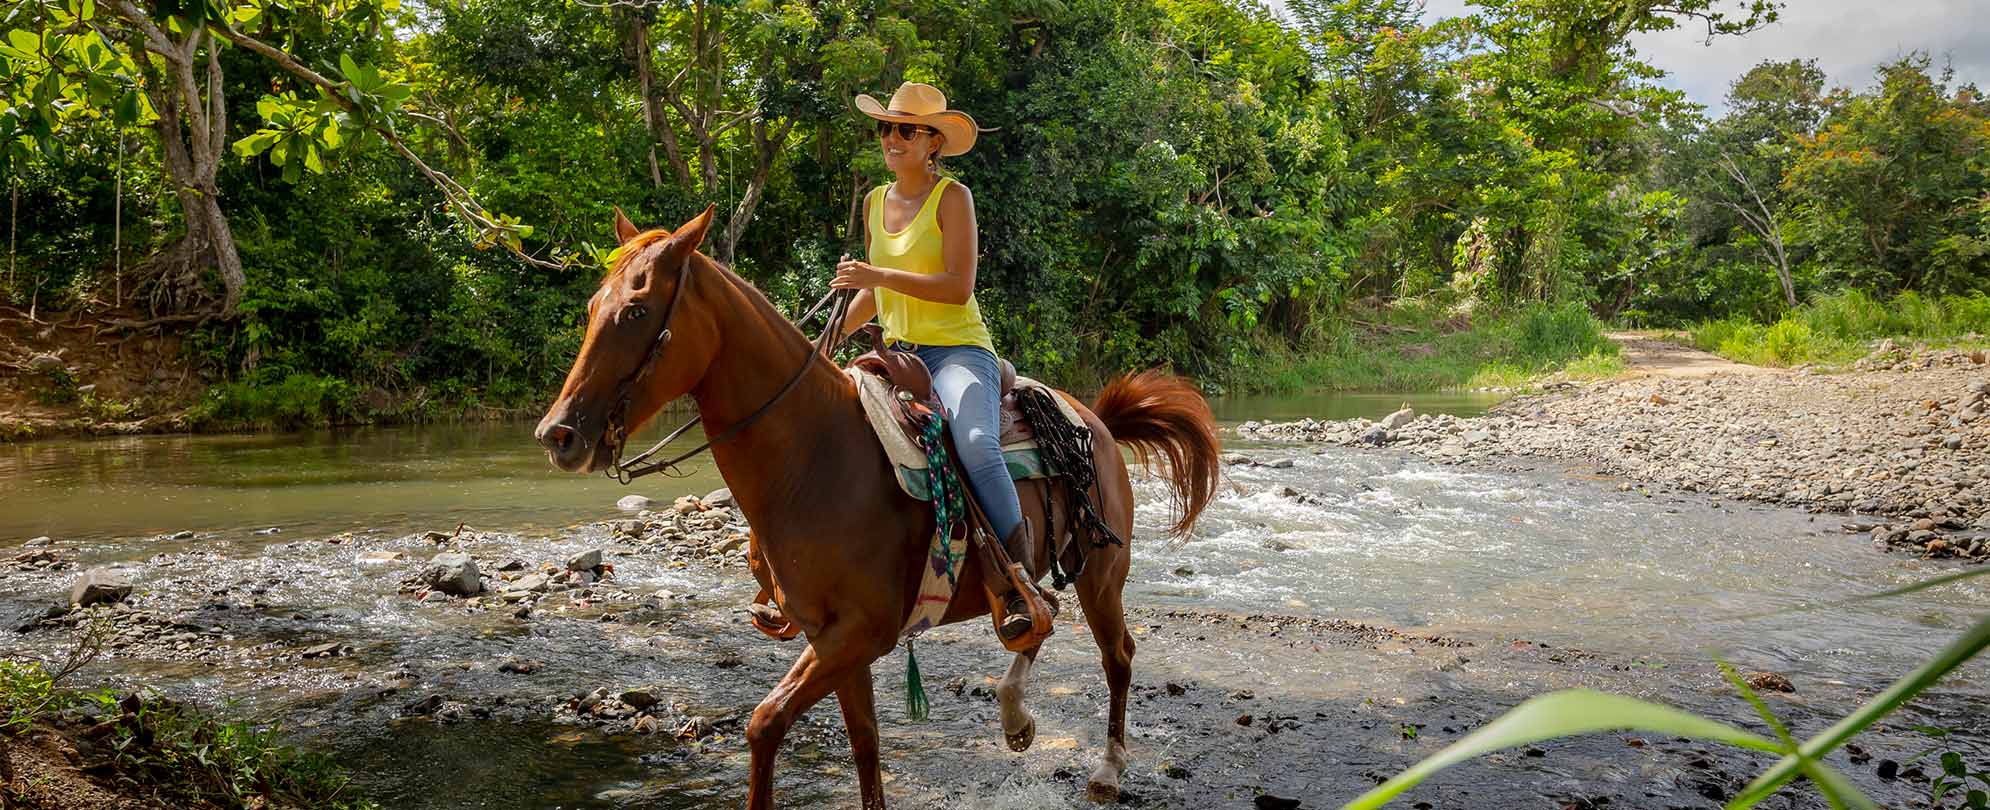 A woman wearing a yellow tank top and a wide-brimmed hat riding a horse through a rocky river. 